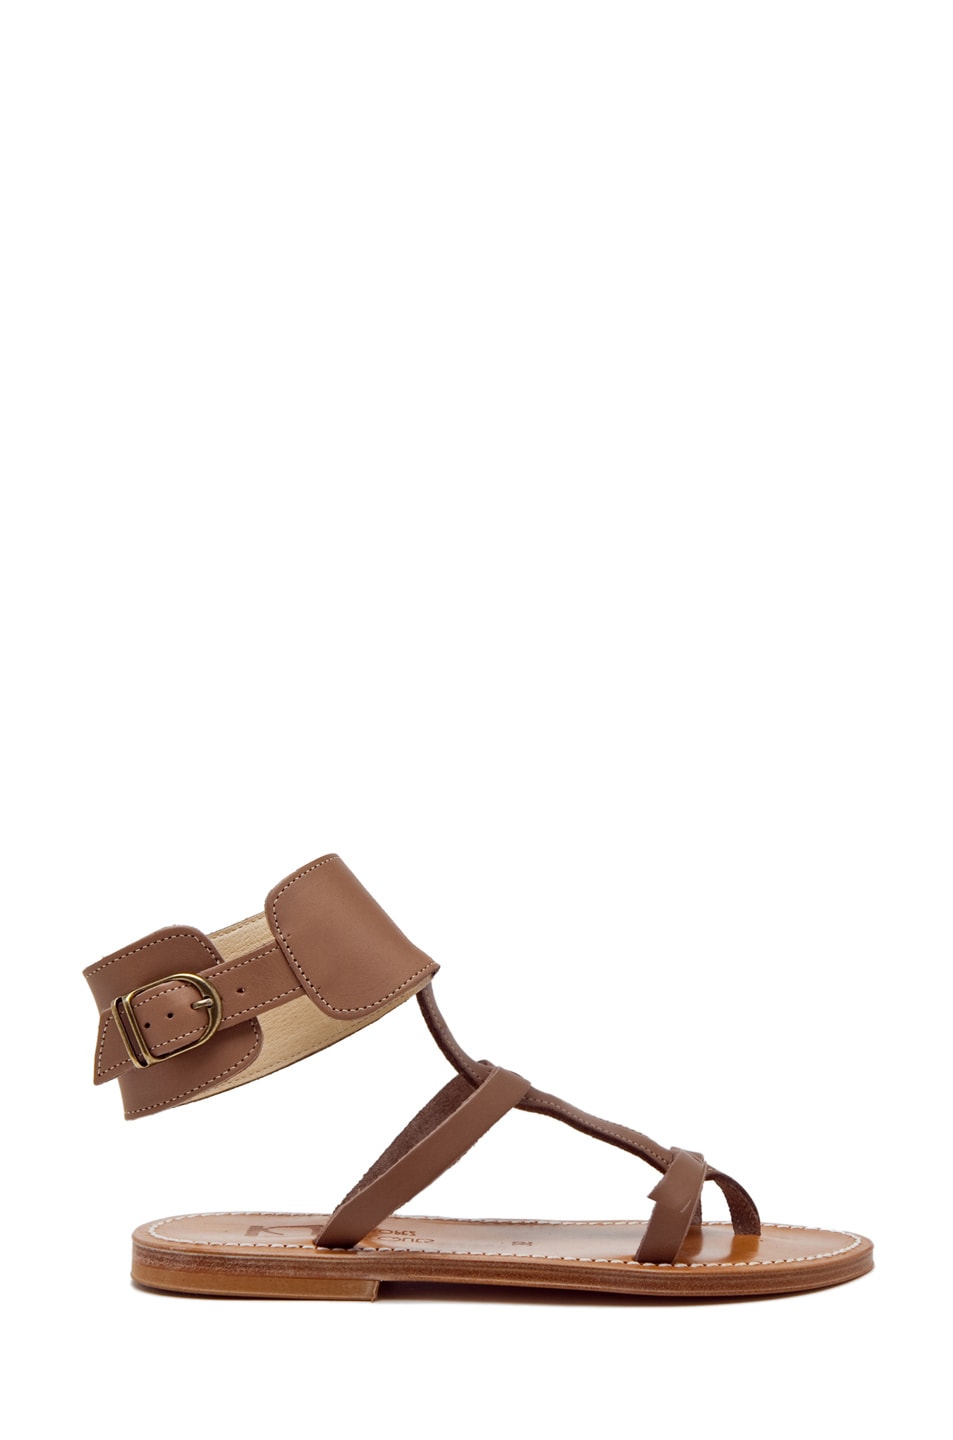 Image 1 of K Jacques K. Jacques Caravelle Leather Sandals in Taupe